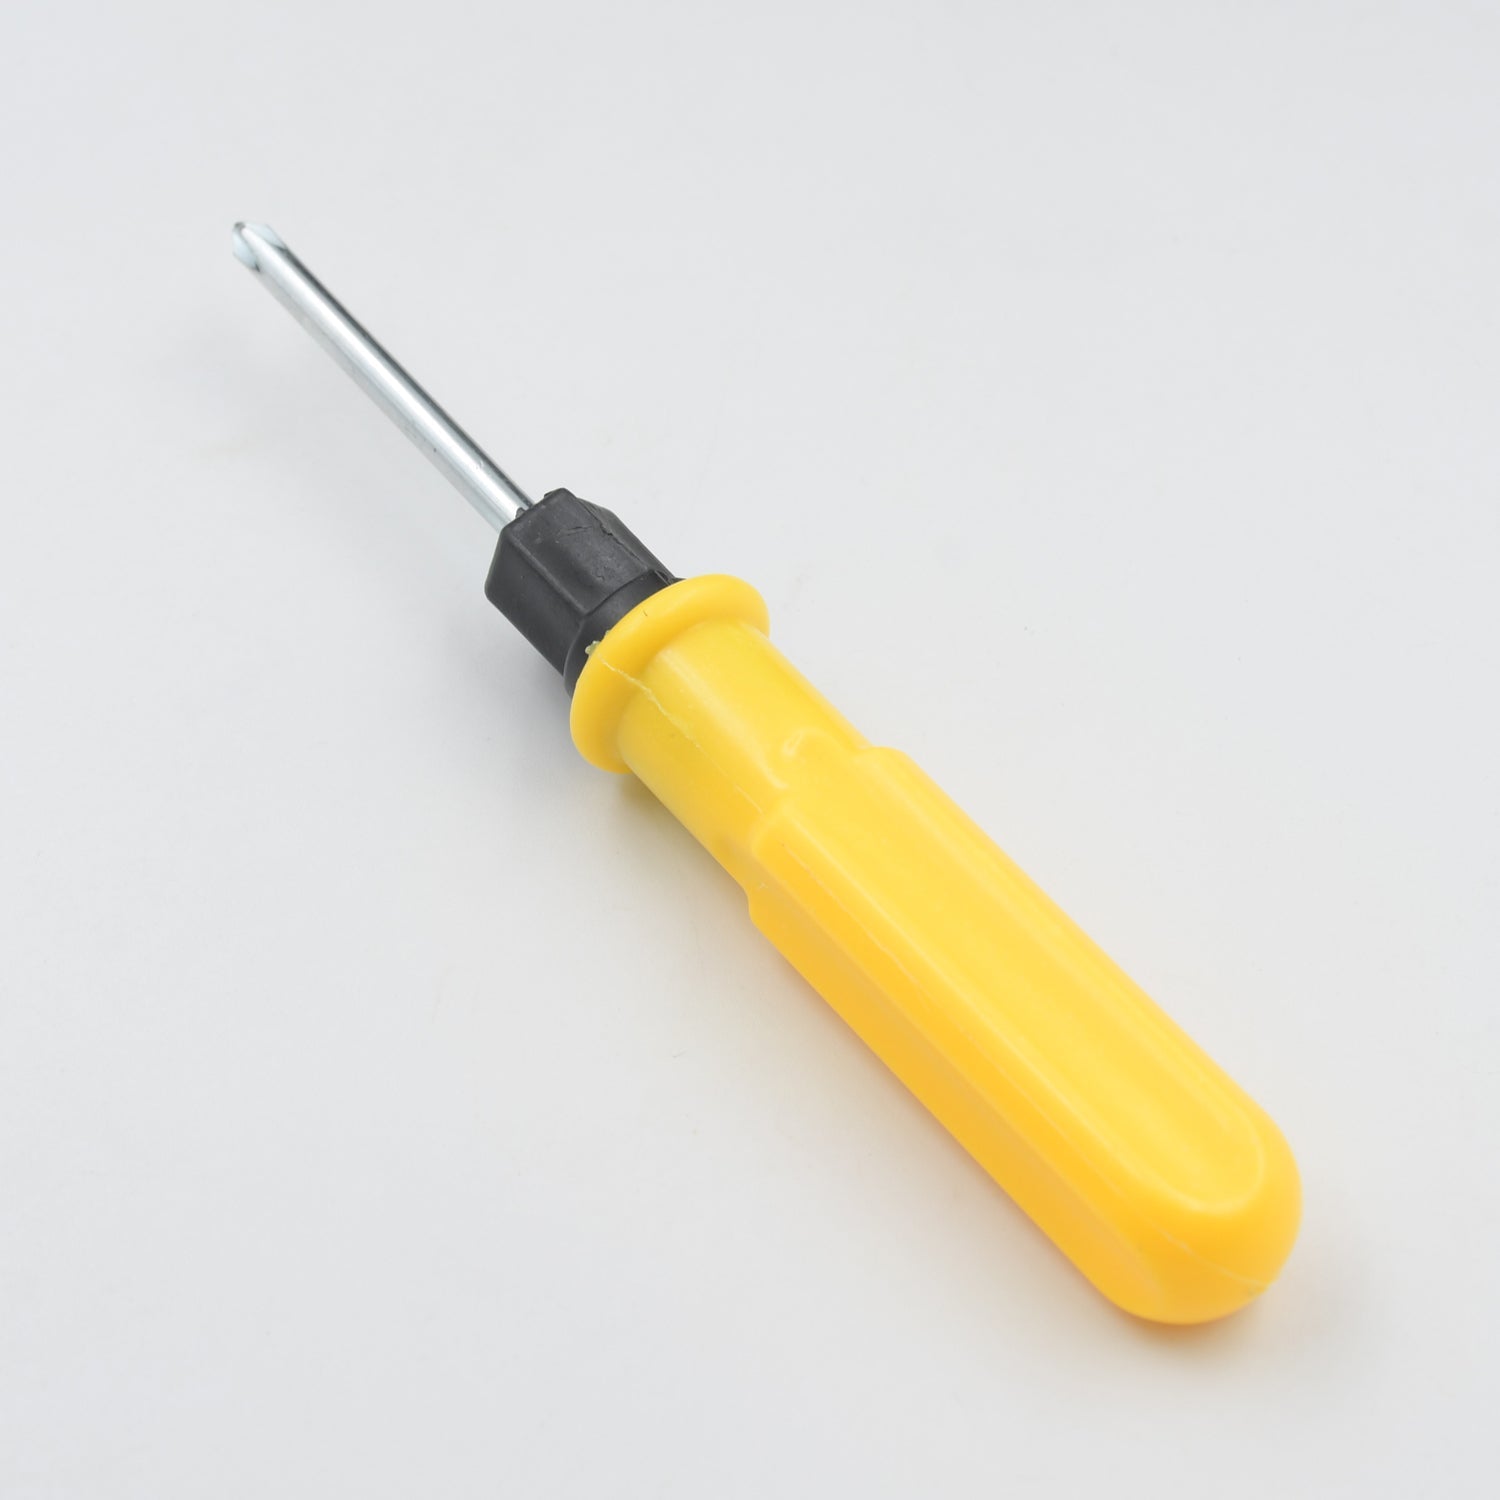 9381B Small Pocket Size 2 in 1 Slotted Cross Head Double Sided Flat Magnetic Screwdriver with PVC Plastic Coated Handle (1 Pc)